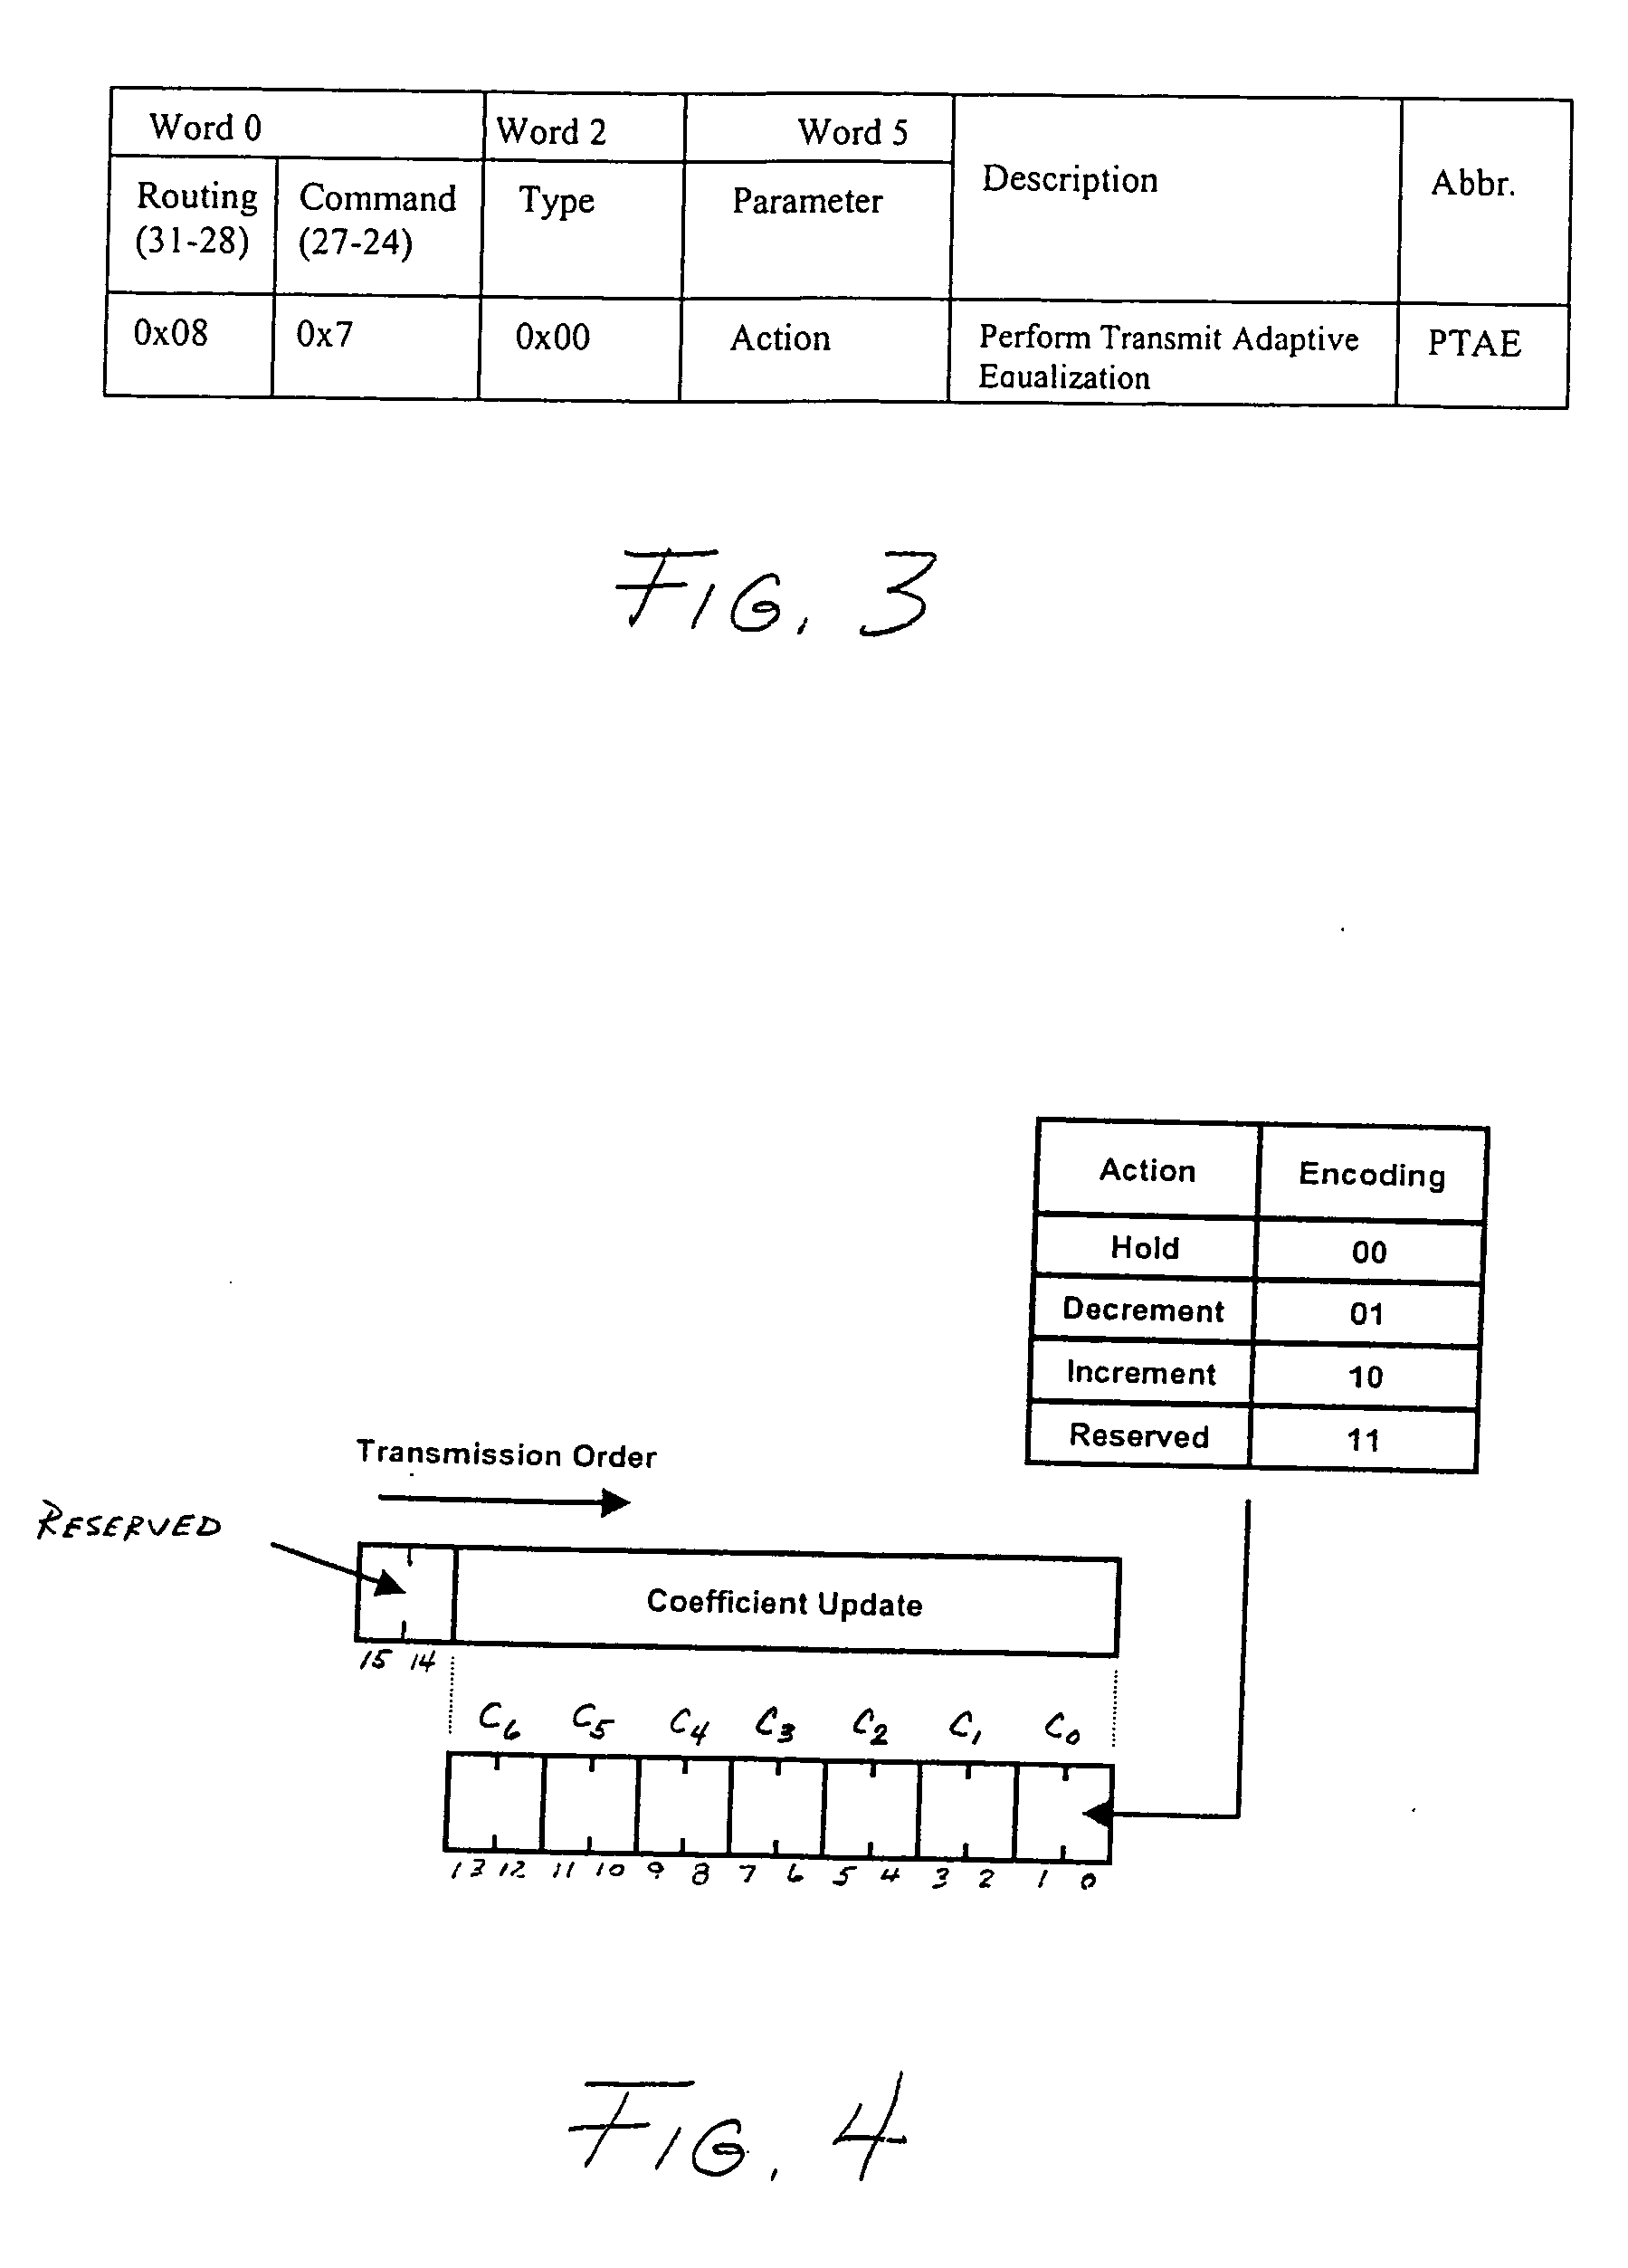 Transmit adaptive equalization for communication system with one or more serial data channels